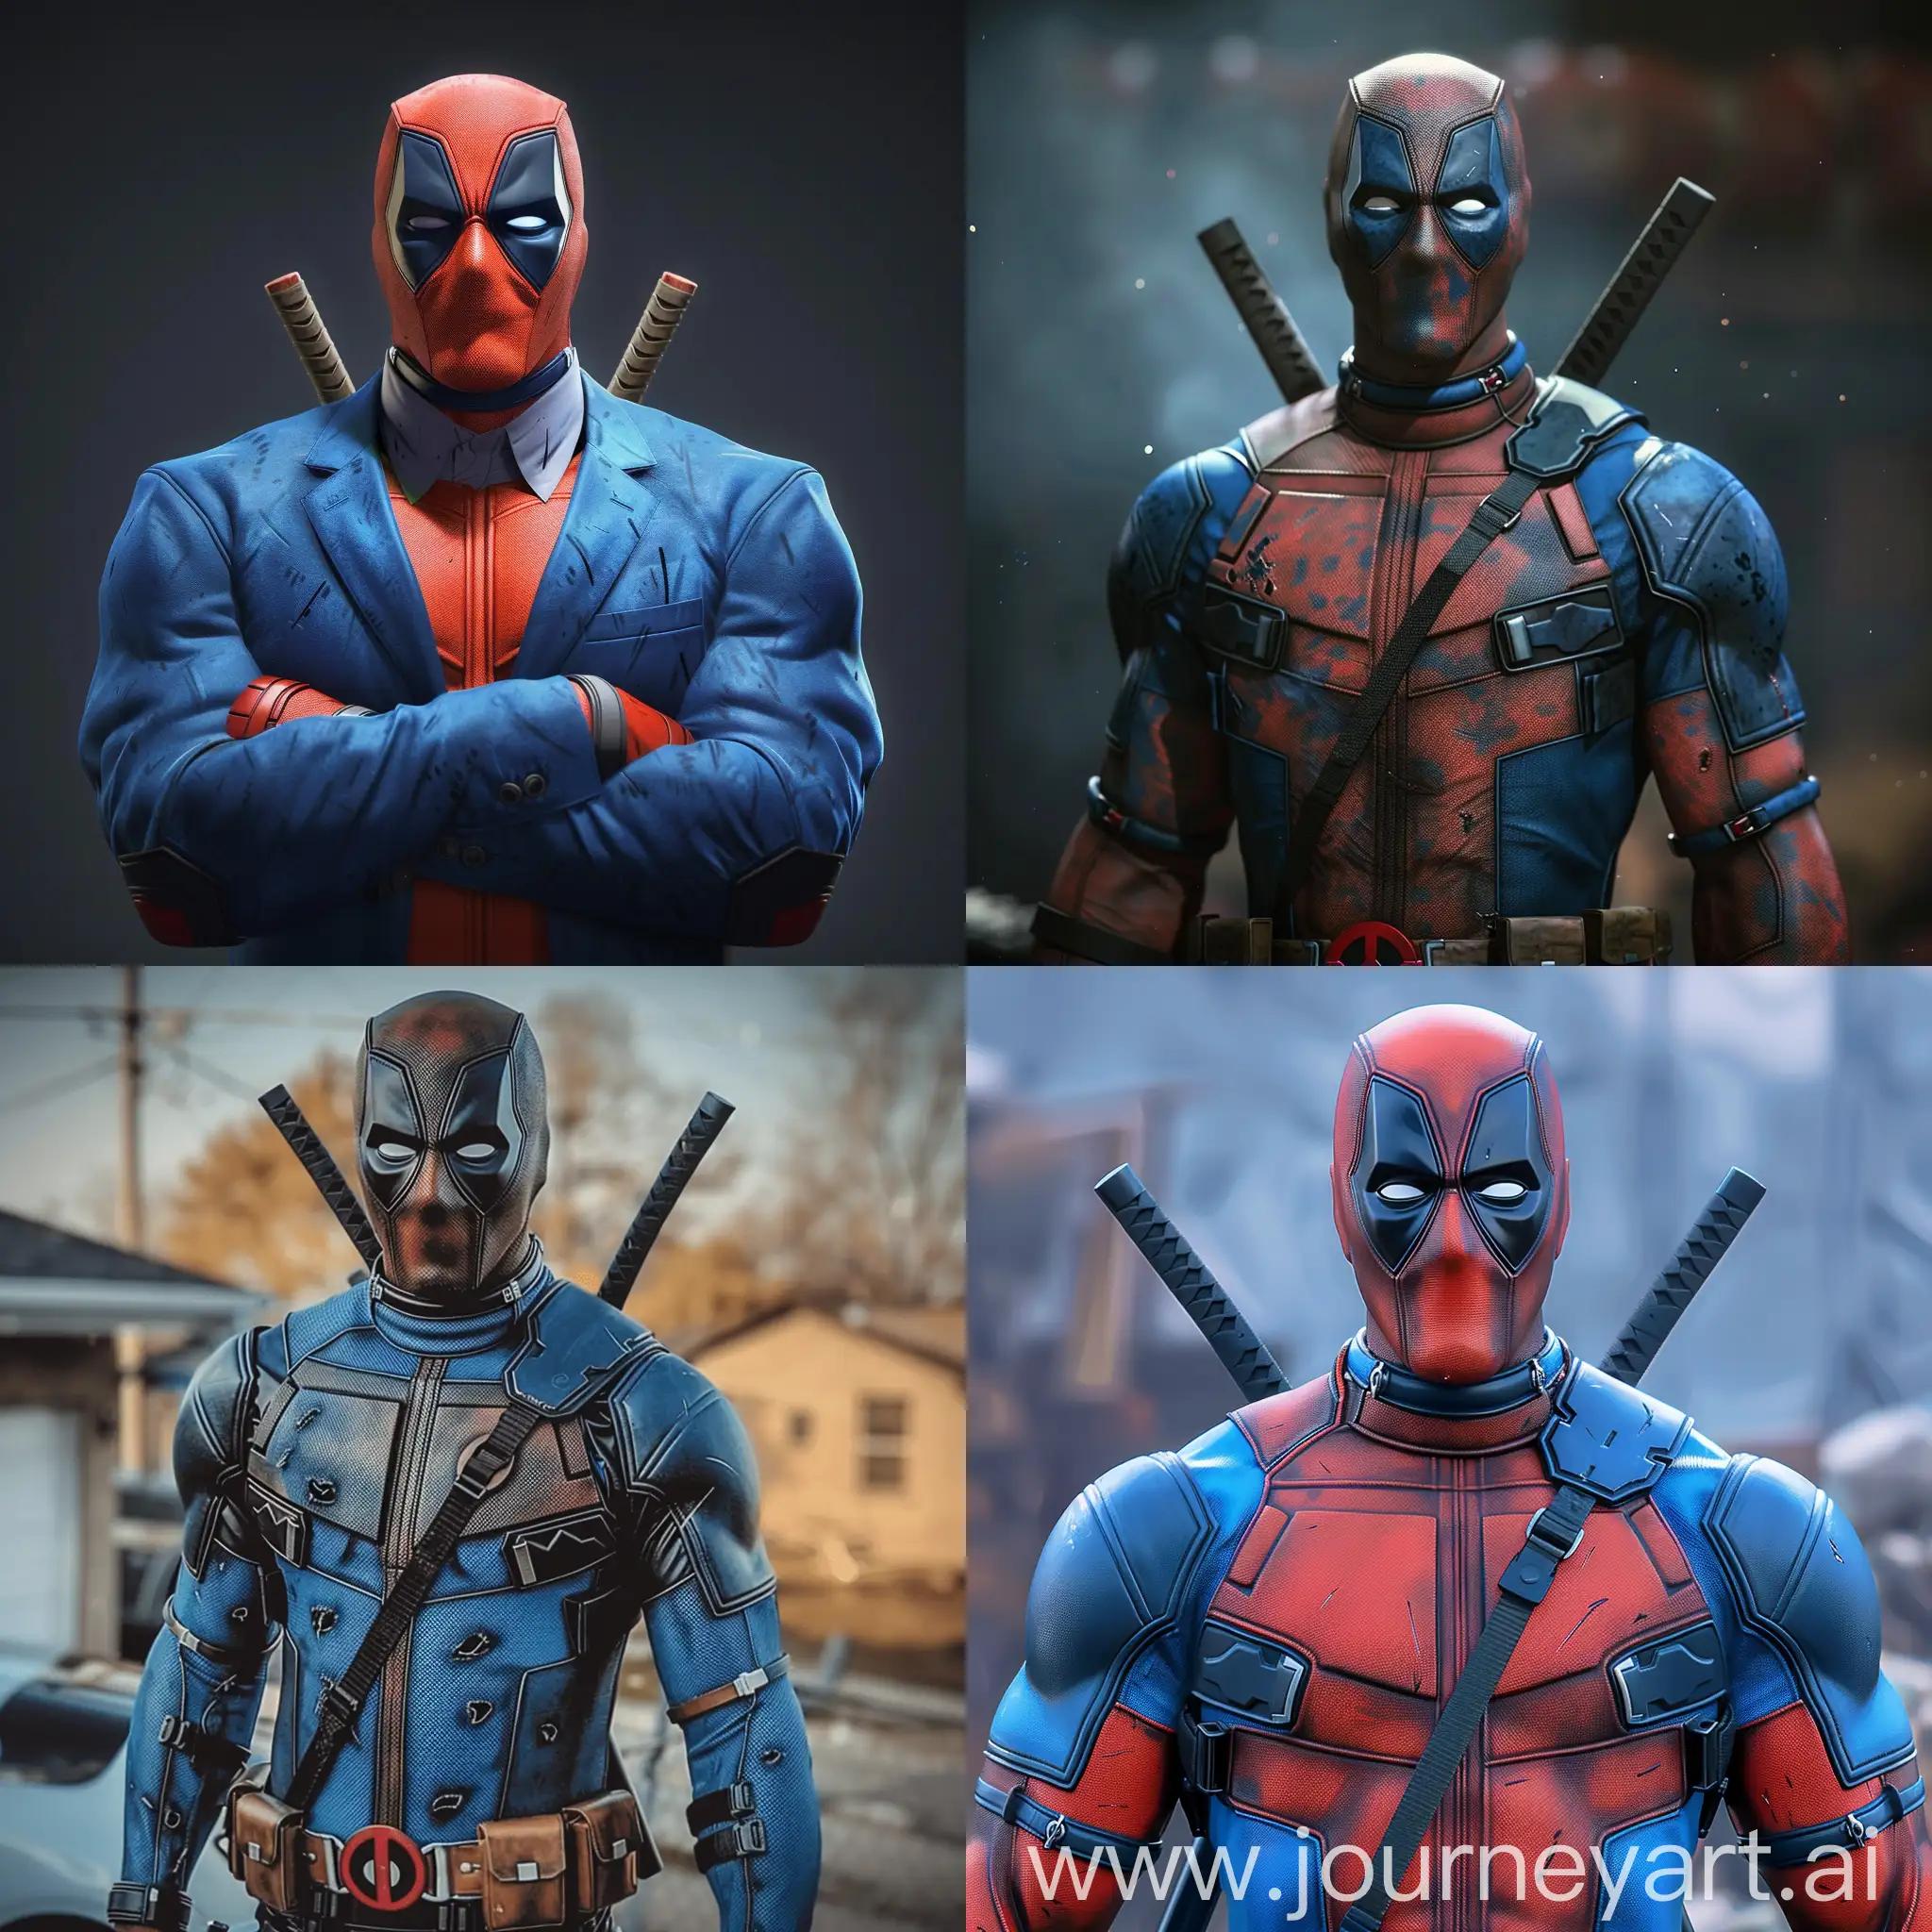 Deathpool in blue suit